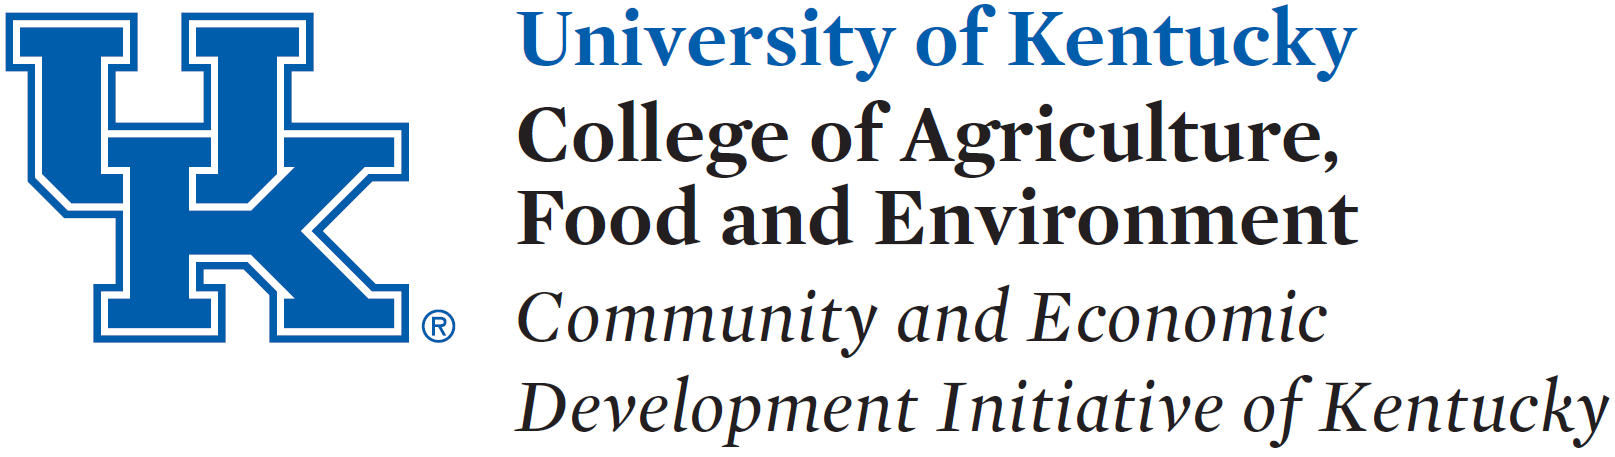 University of Kentucky College of Agriculture, Food and Environment CEDIK logo